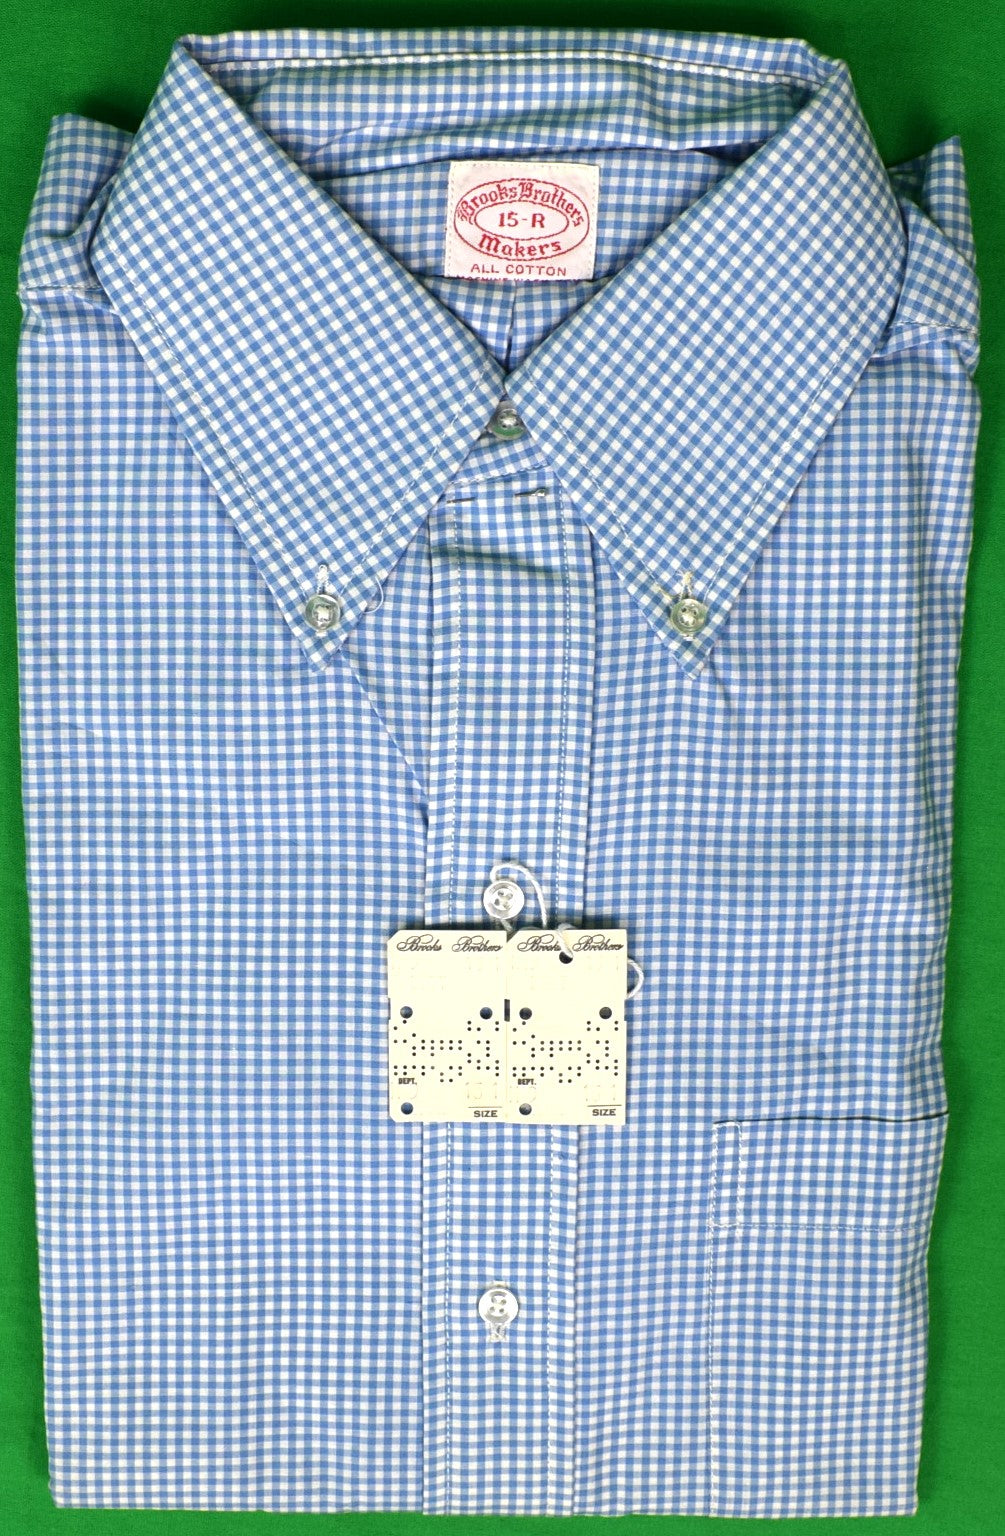 Brooks Brothers Blue/ White Gingham Check Broadcloth B/D Sport Shirt Sz 15-R (Deadstock w/ BB Tag)